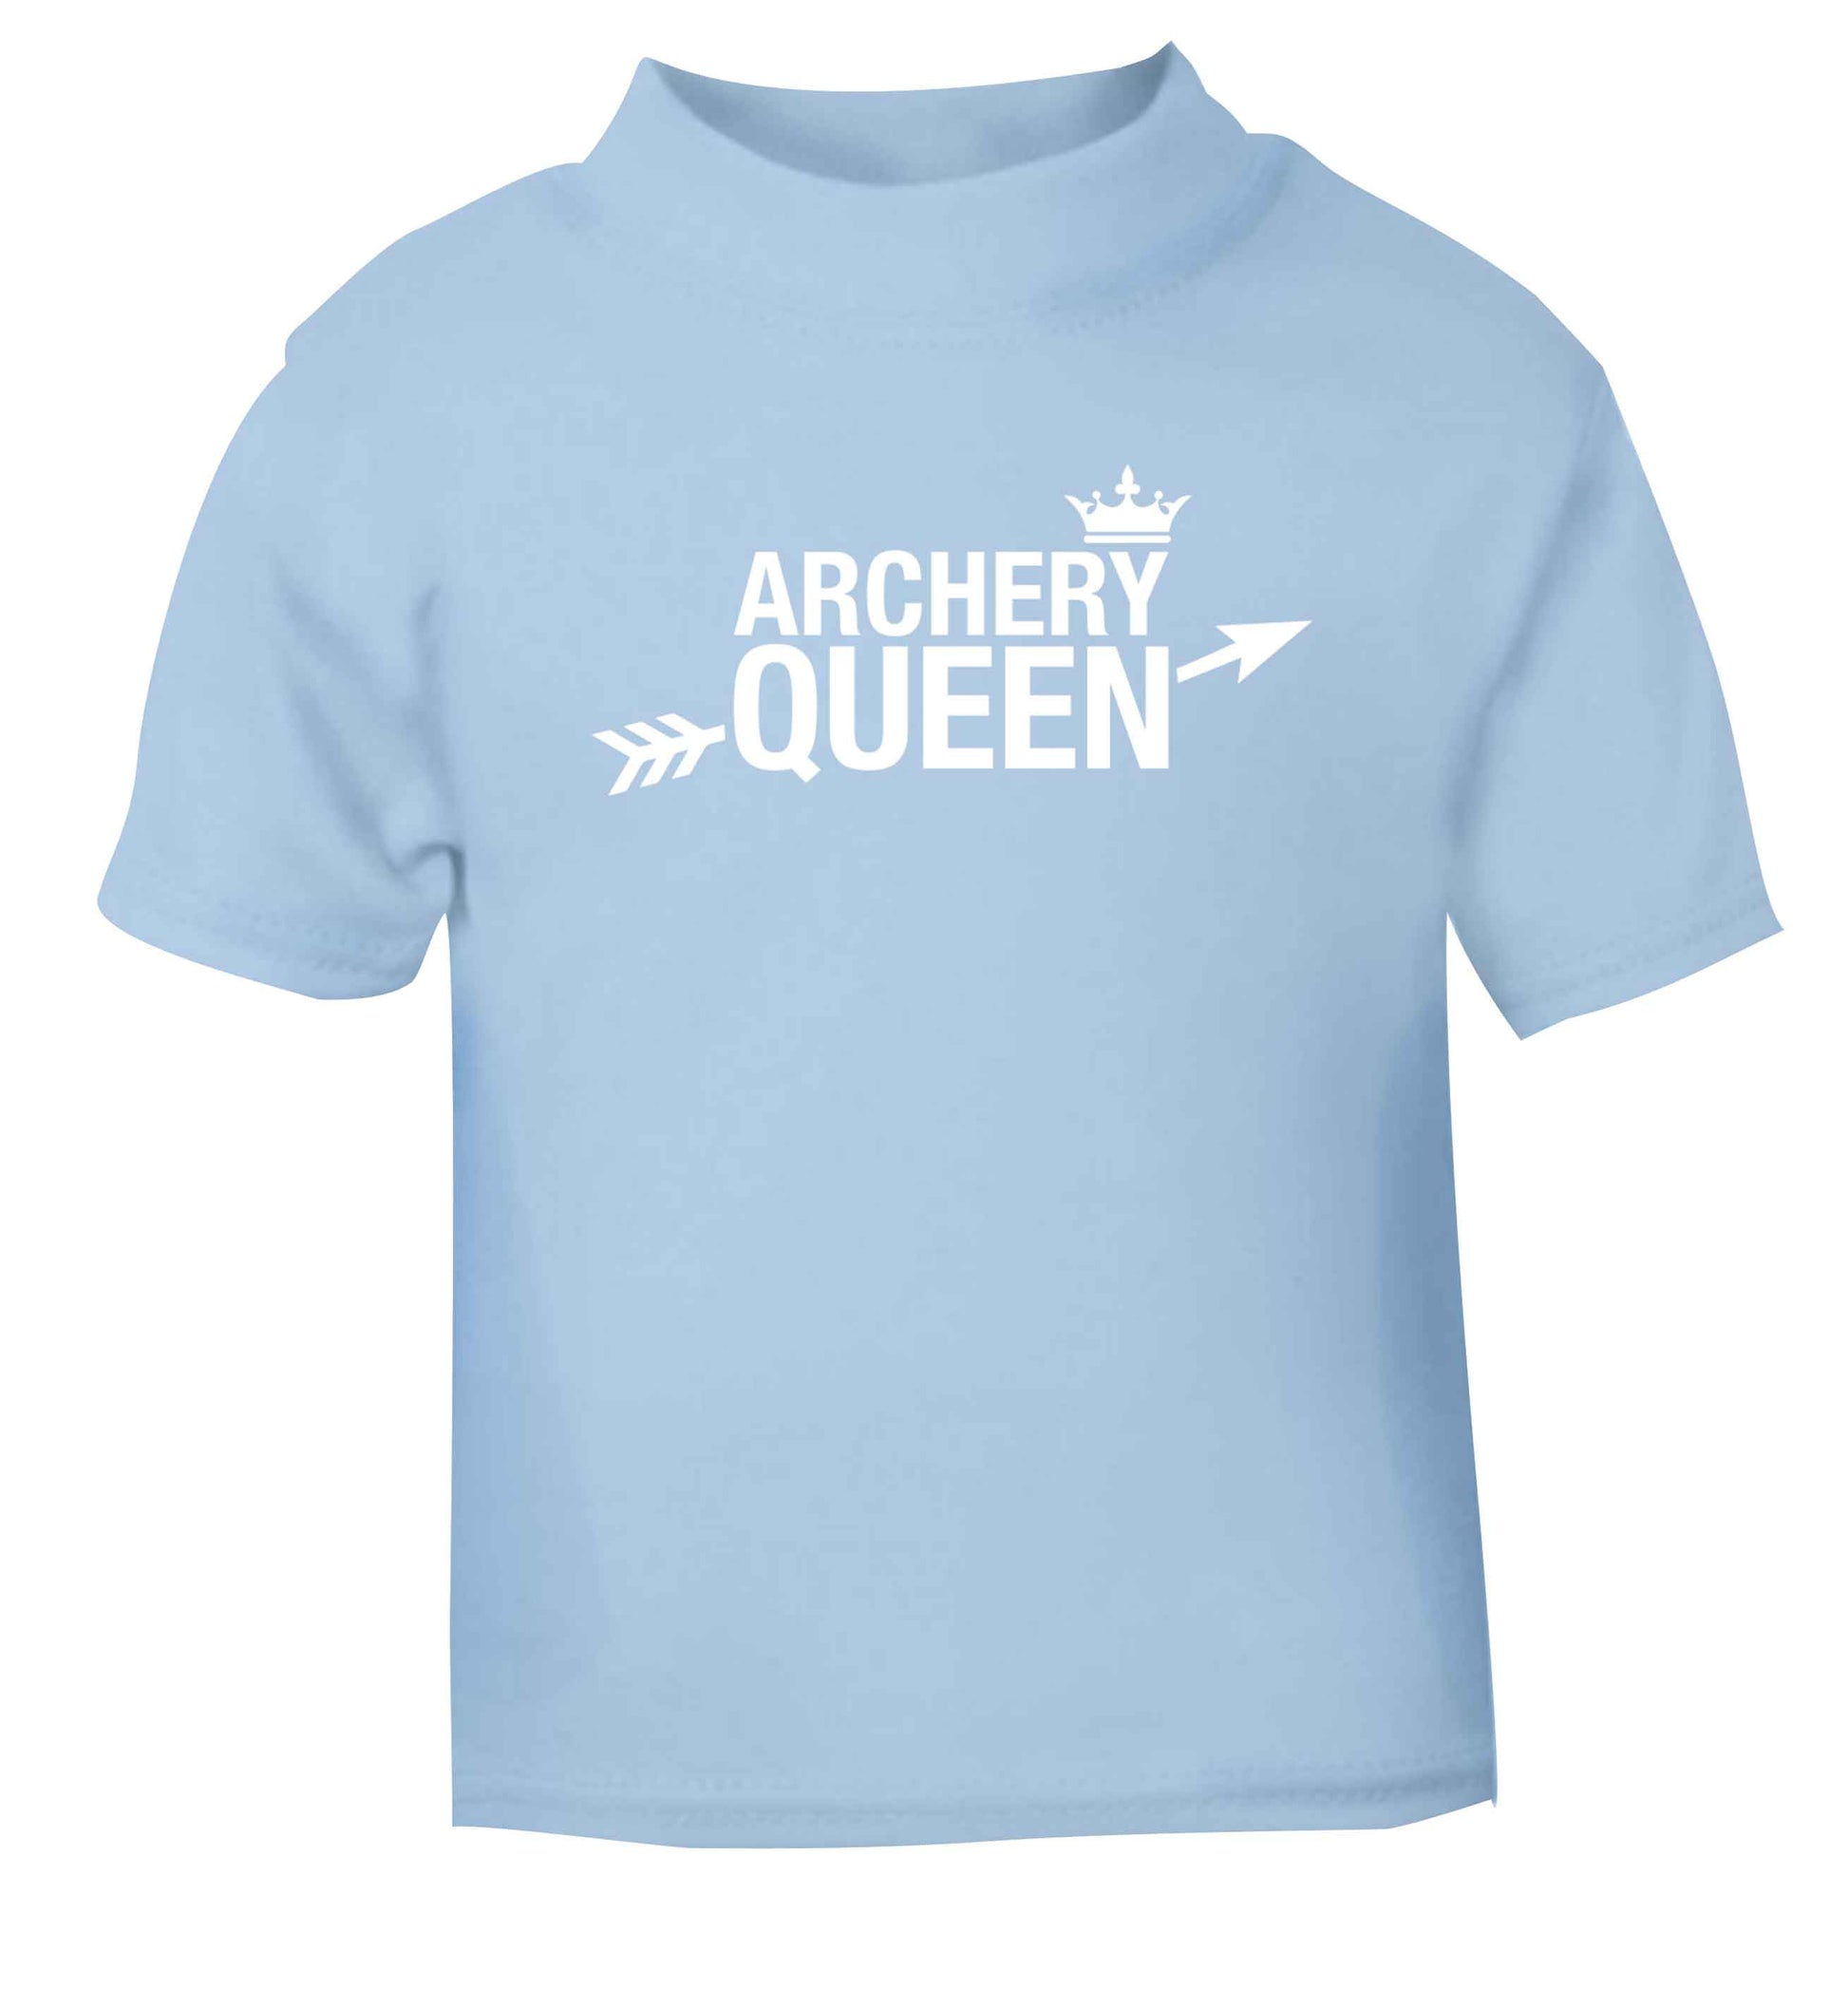 Archery queen light blue Baby Toddler Tshirt 2 Years